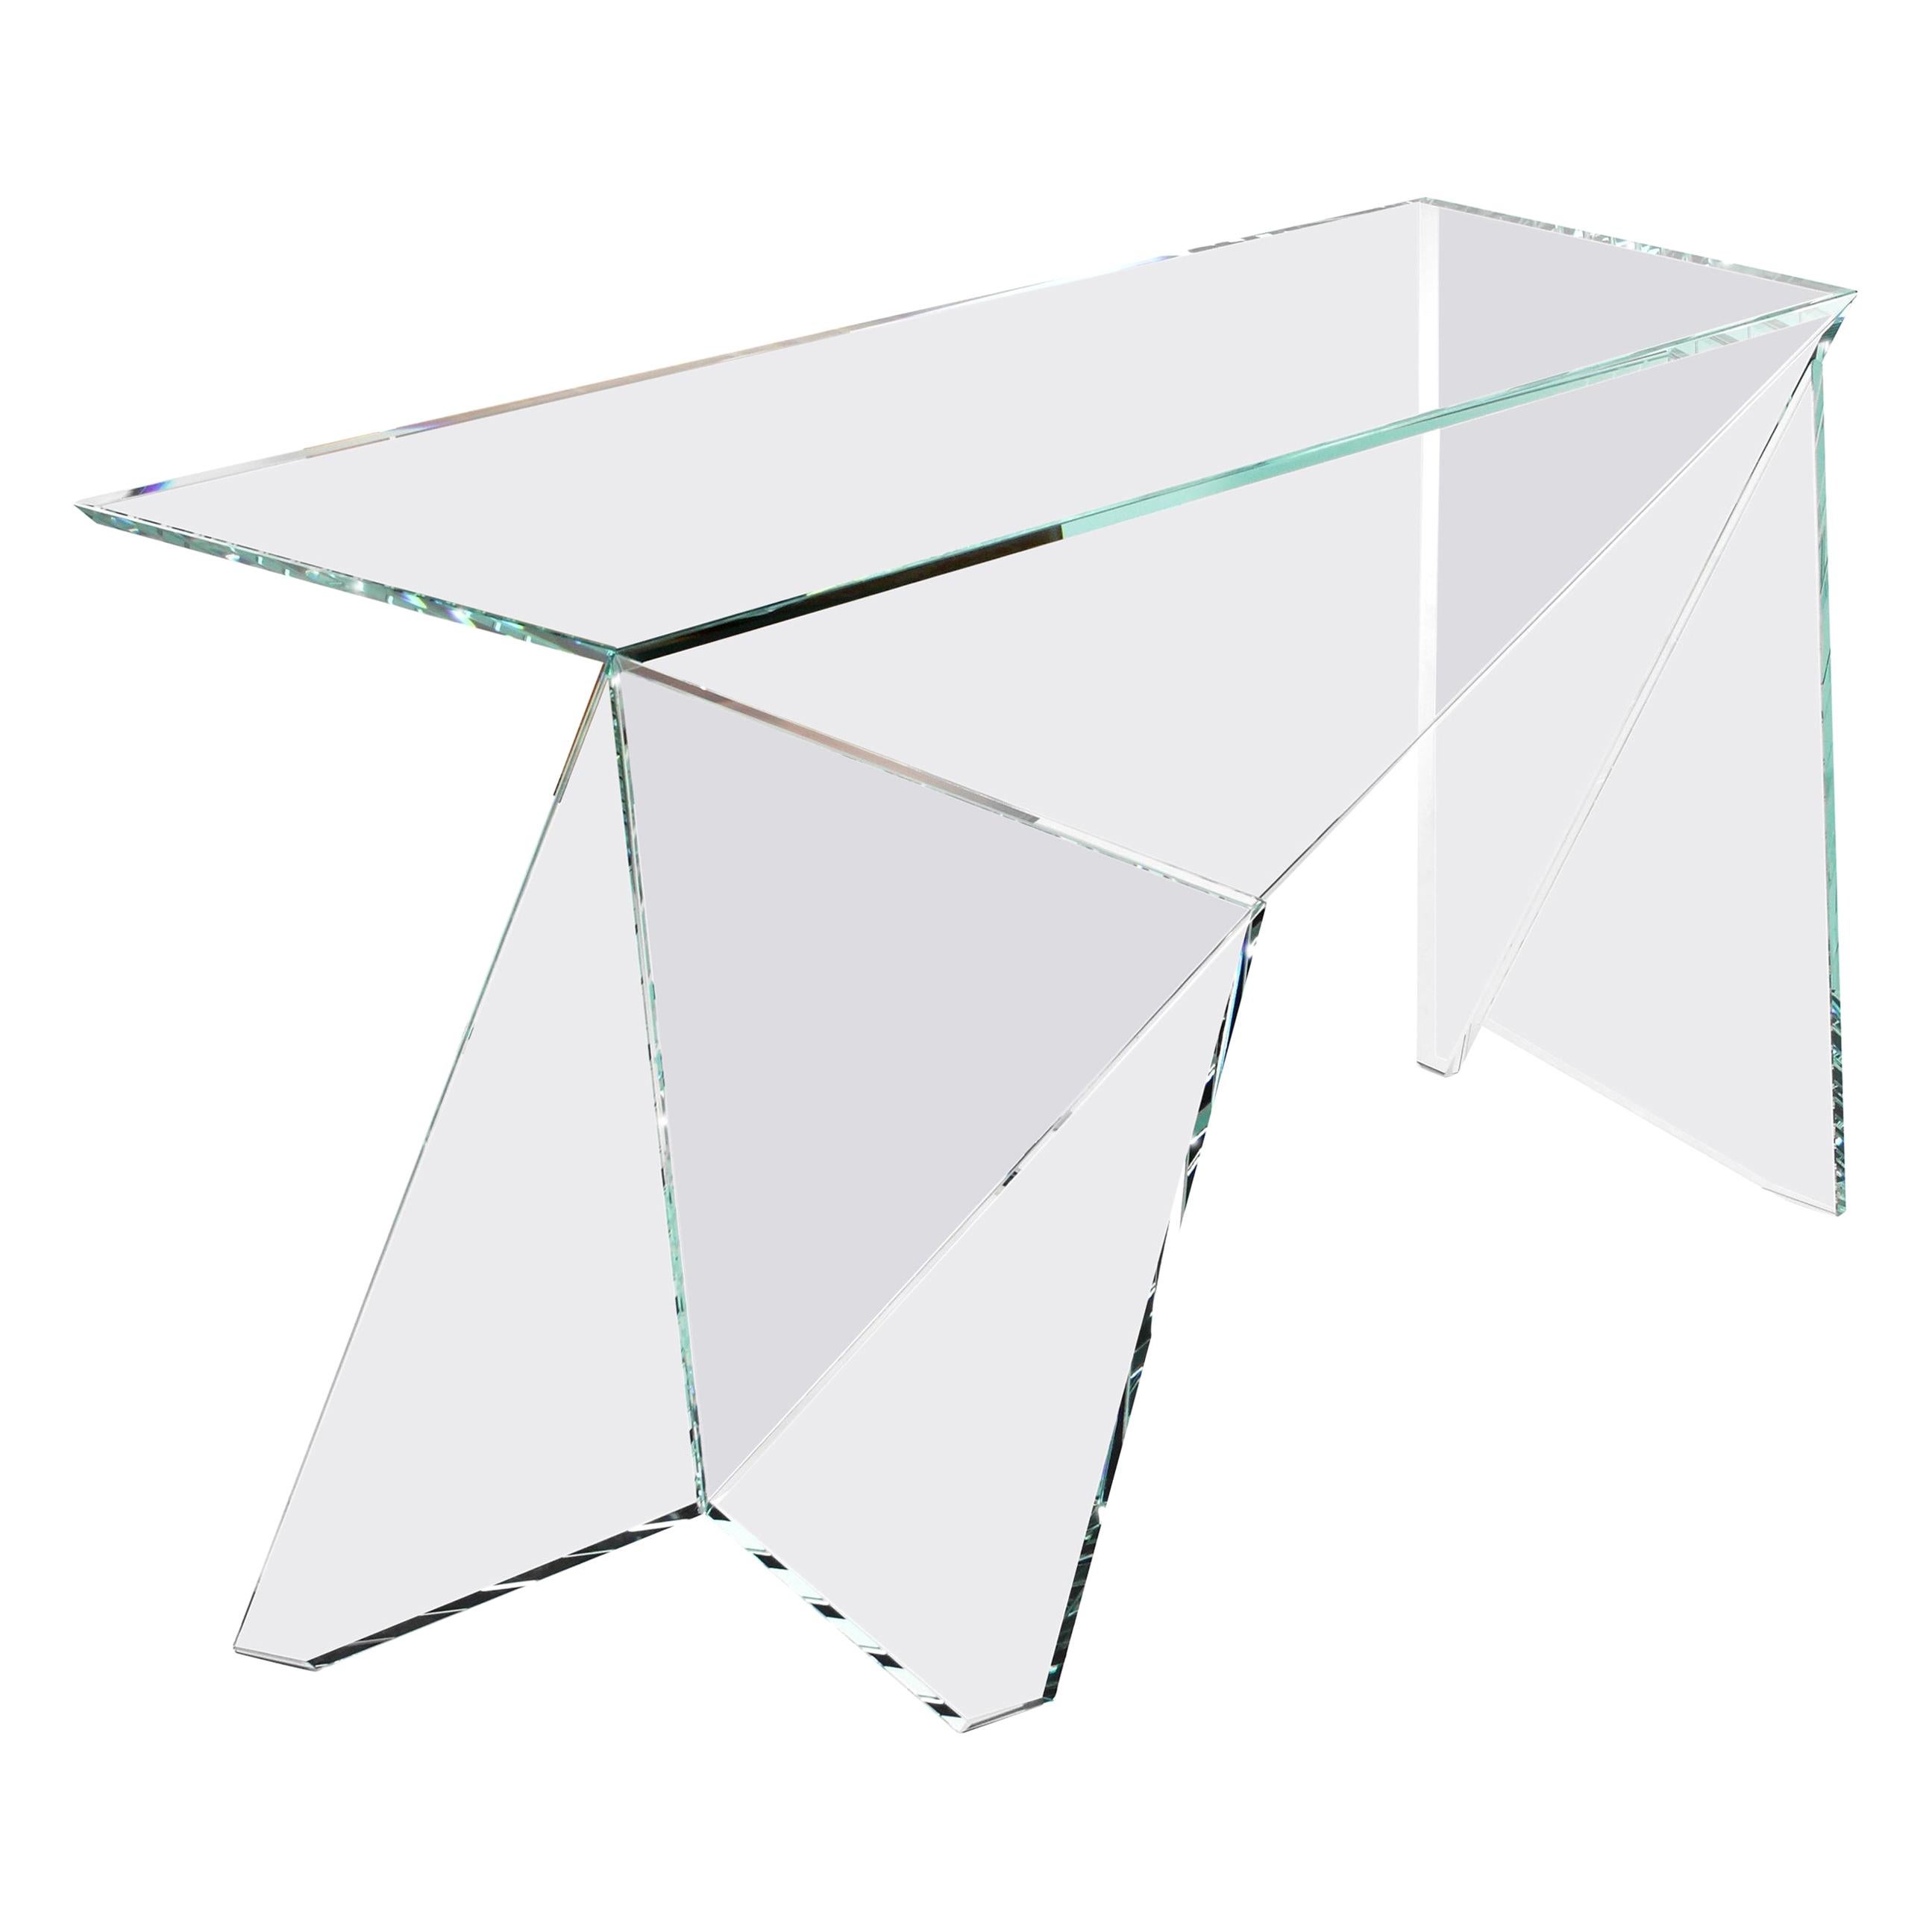 Desk or Writing Table Glass Crystal Geometric Shape Collectible Design Italy